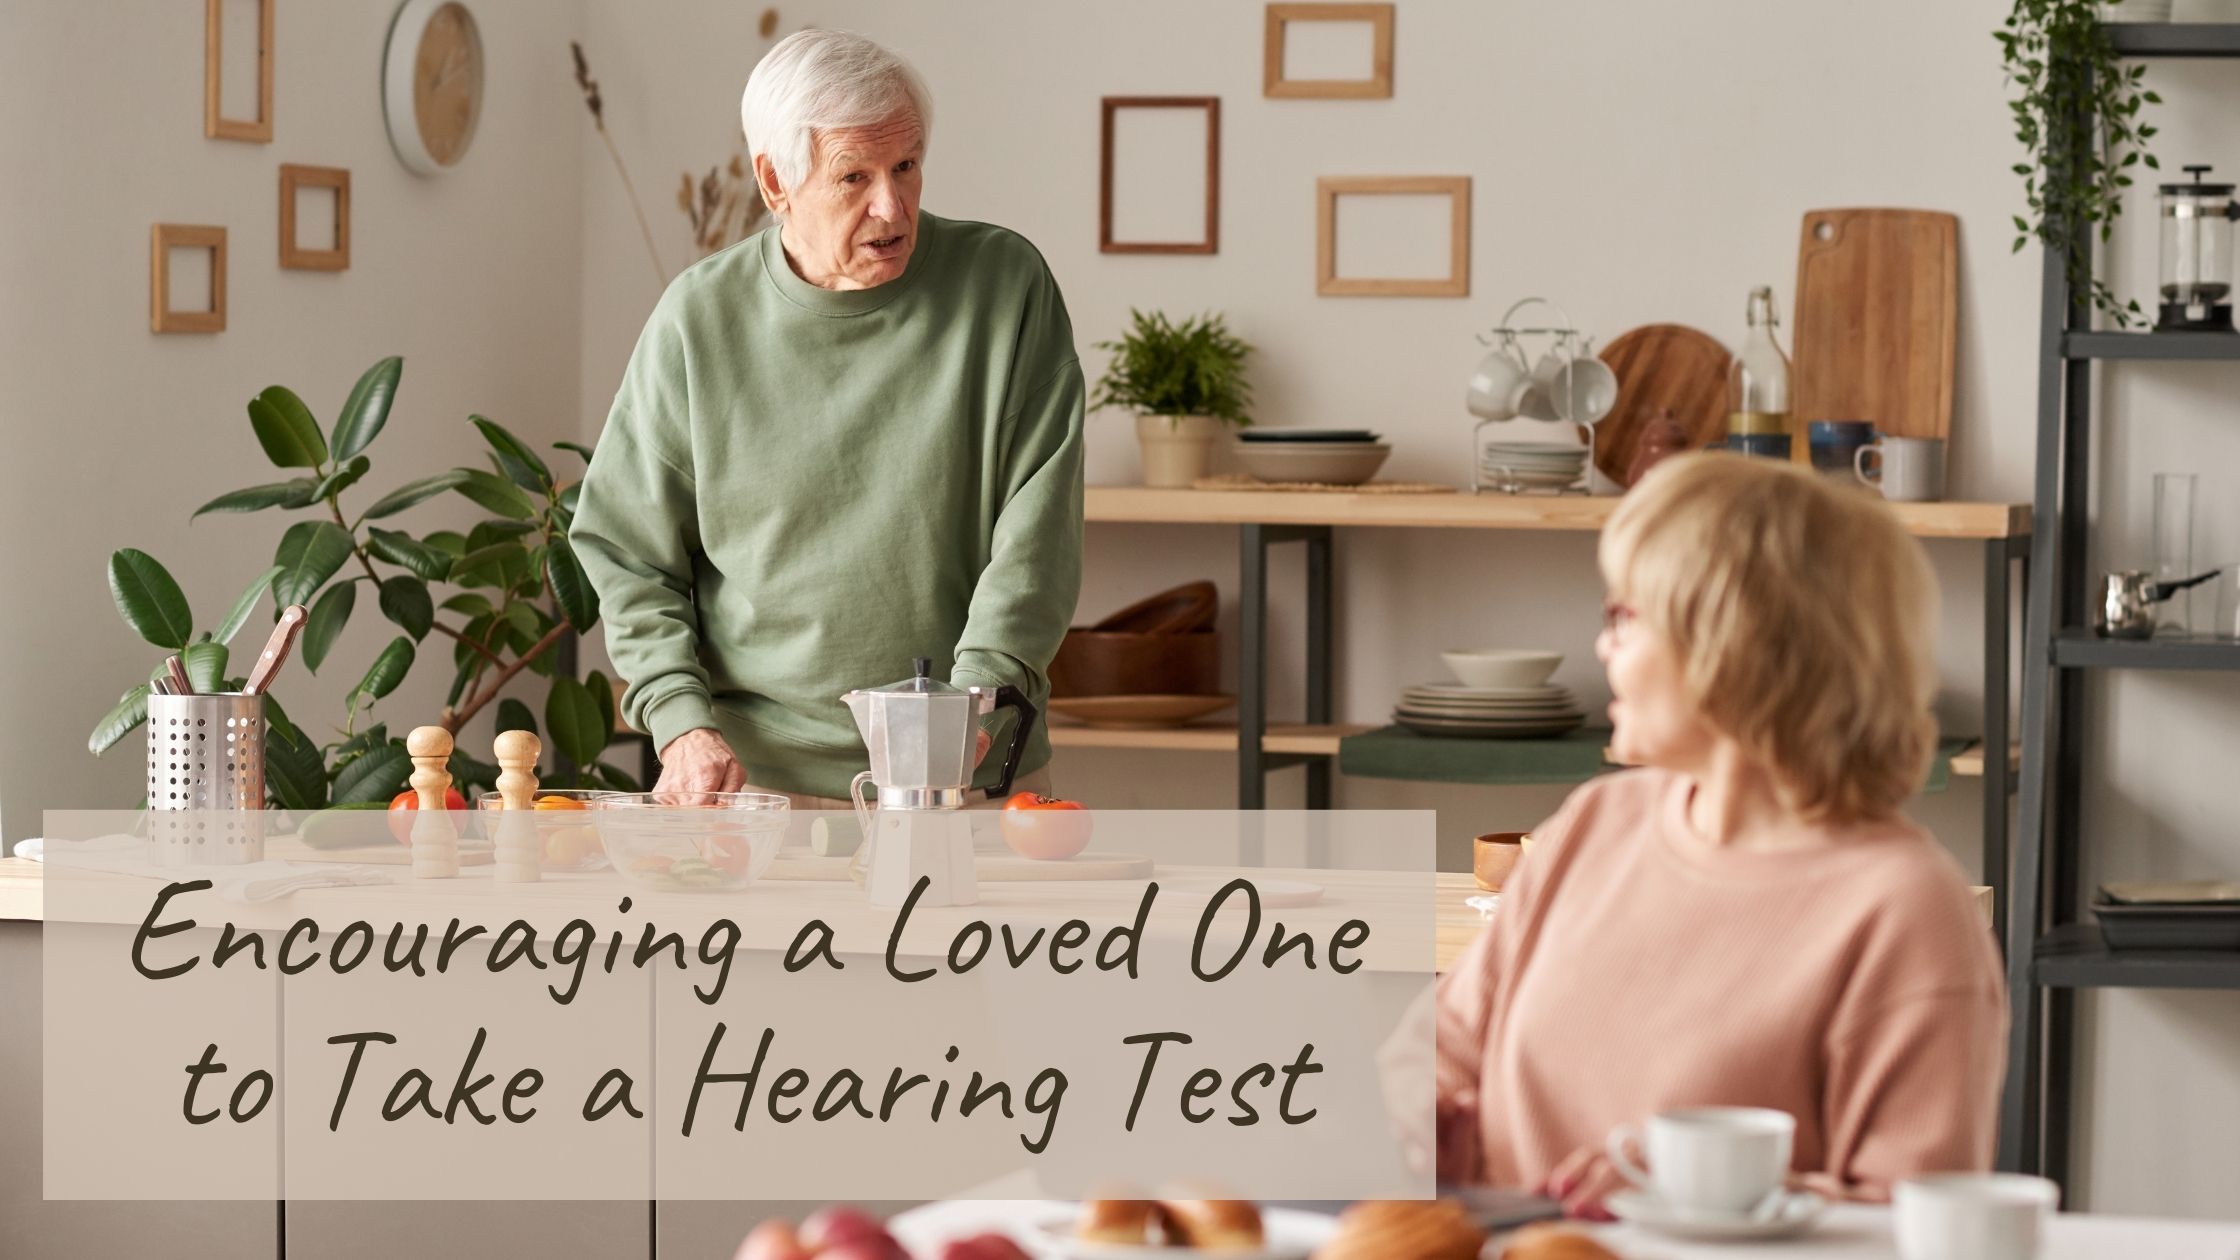 Featured image for “Encouraging a Loved One to Take a Hearing Test”